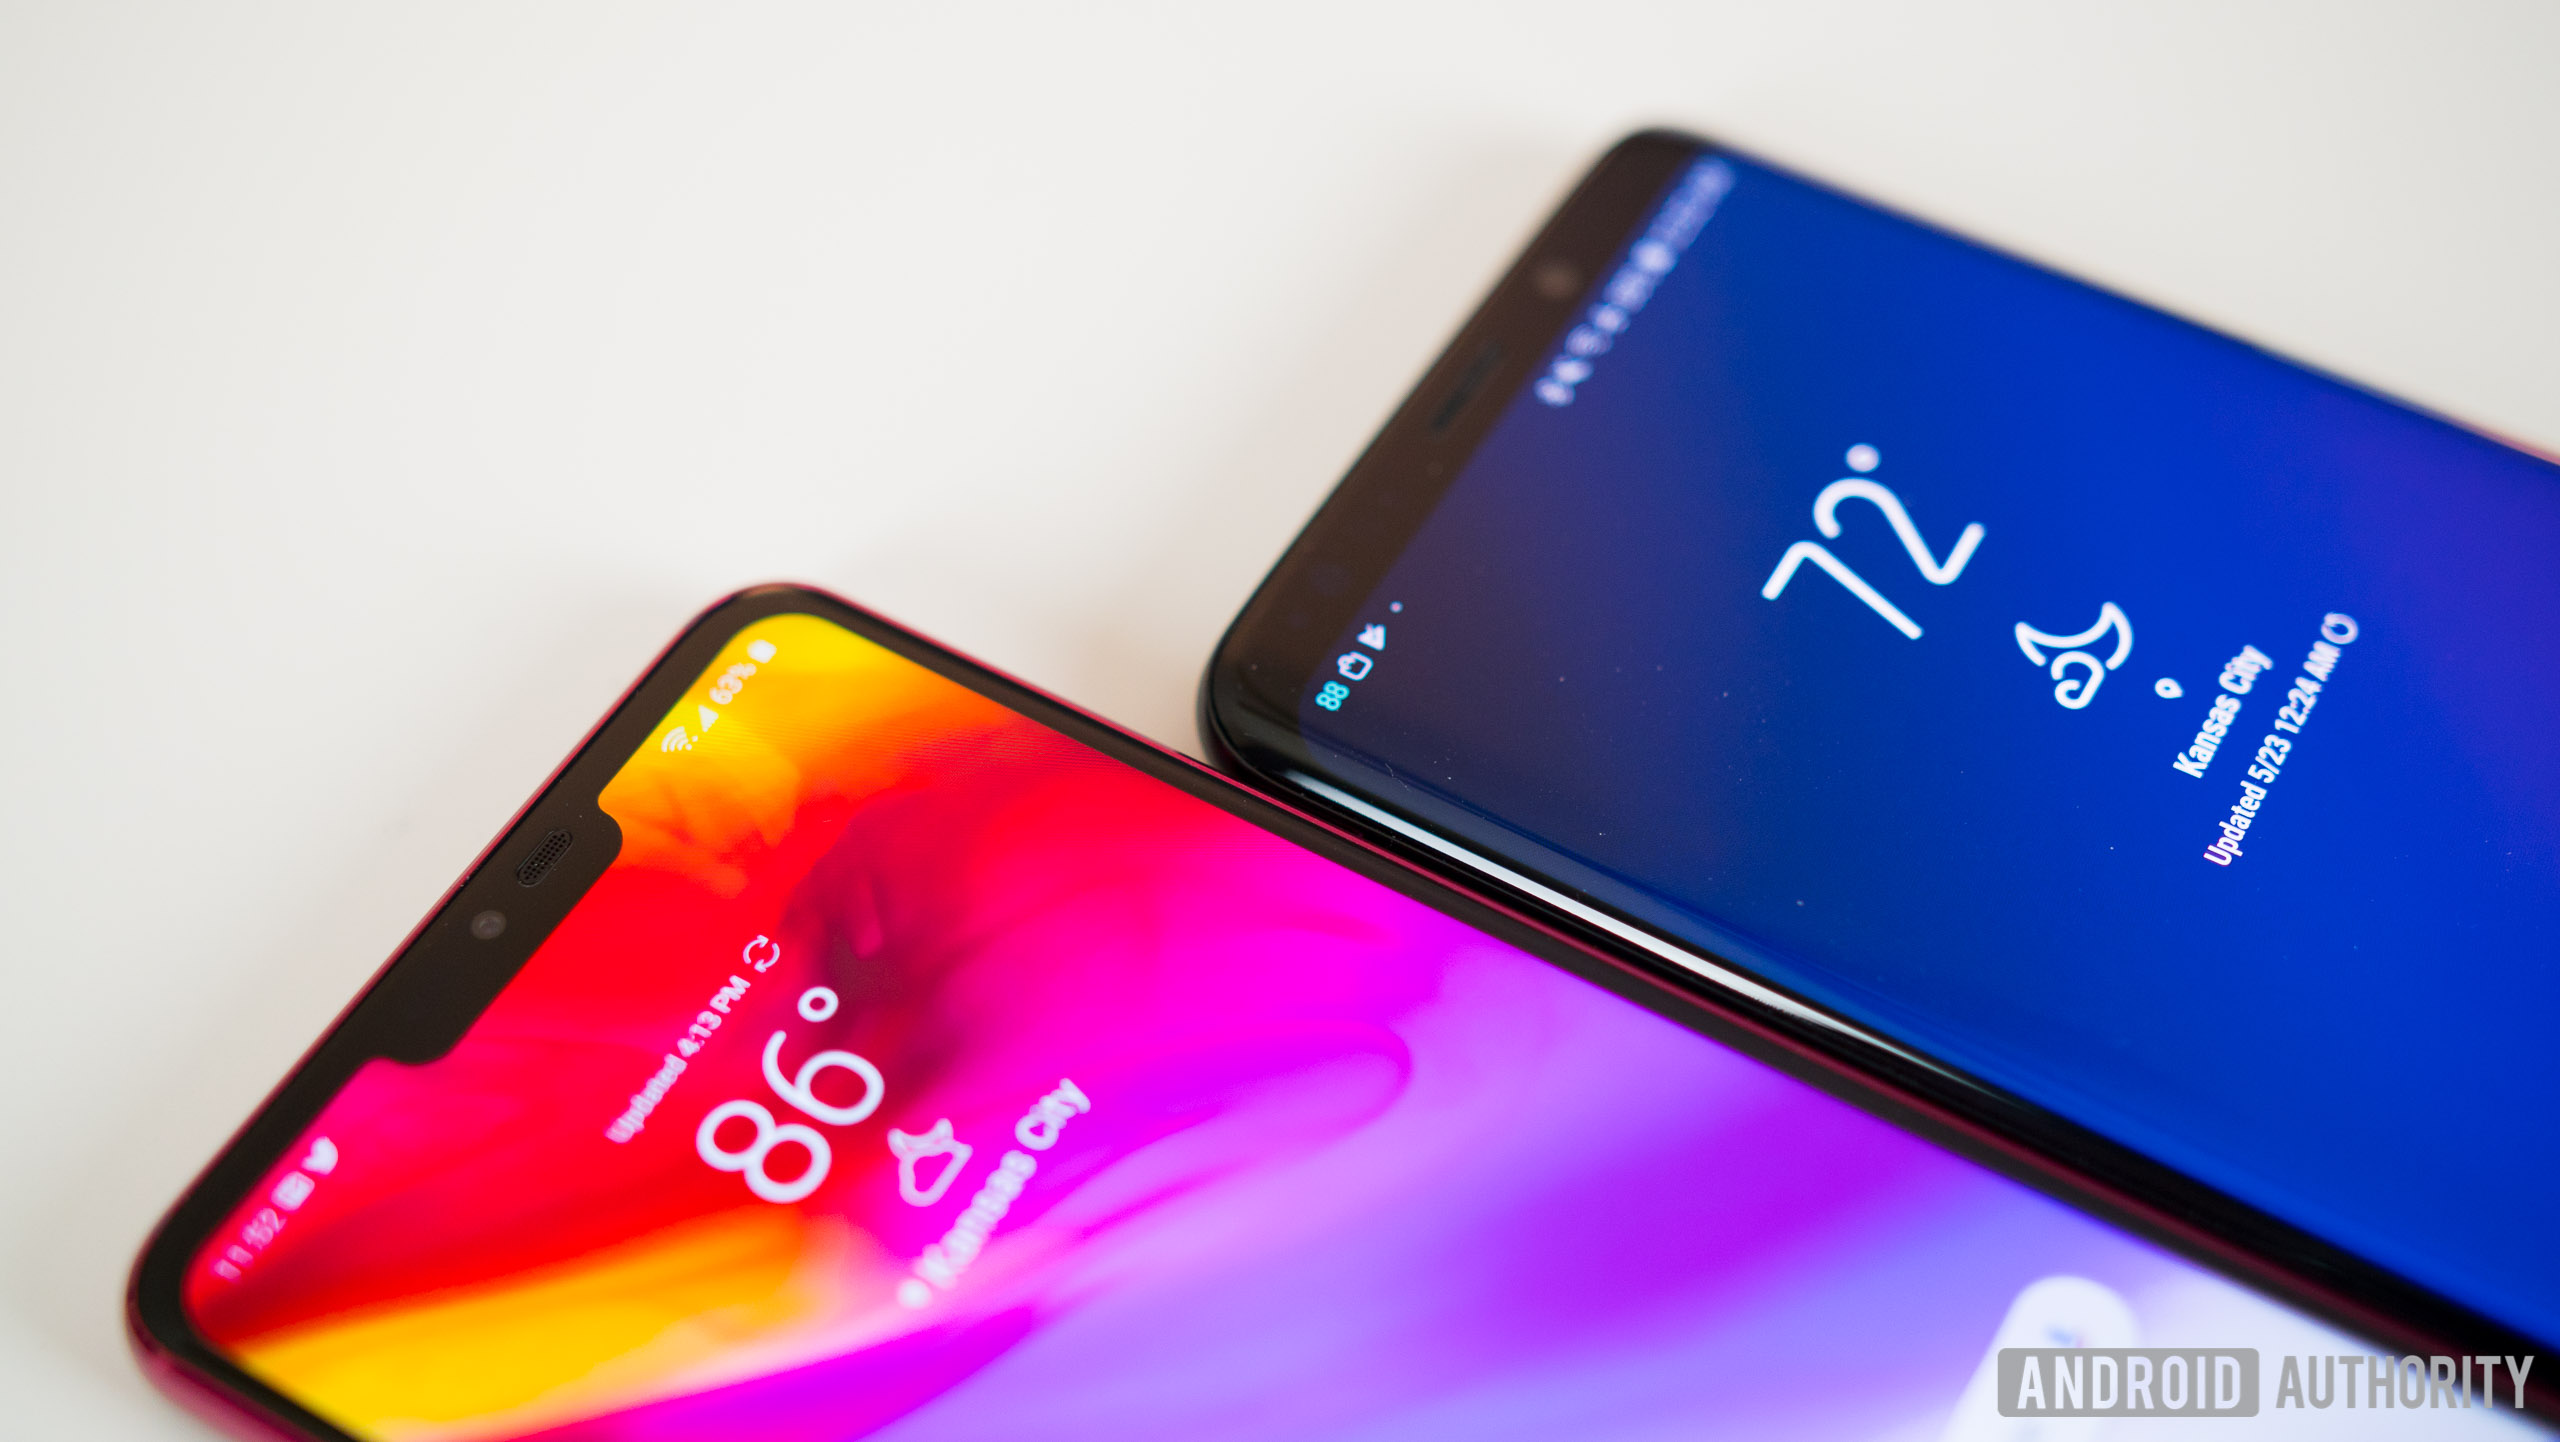 The LG G7 ThinQ and Samsung Galaxy S9 Plus, face-up on a white desk next to each other.